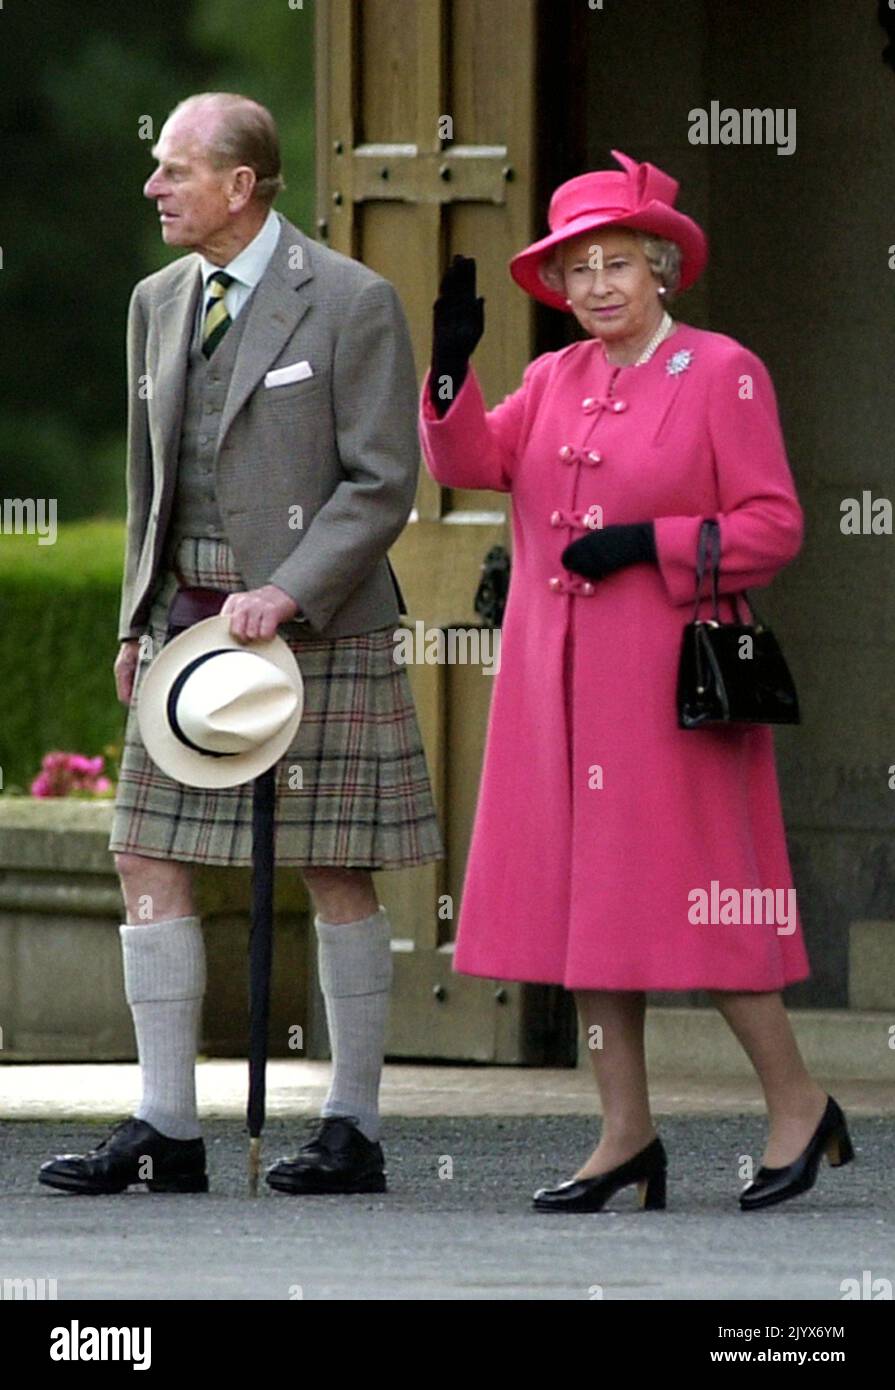 File photo dated 07/08/2002 of Queen Elizabeth II waving as she departs with the Duke of Edinburgh from the lawn of Balmoral castle. The Queen died peacefully at Balmoral this afternoon, Buckingham Palace has announced. Issue date: Thursday September 8, 2022. Stock Photo